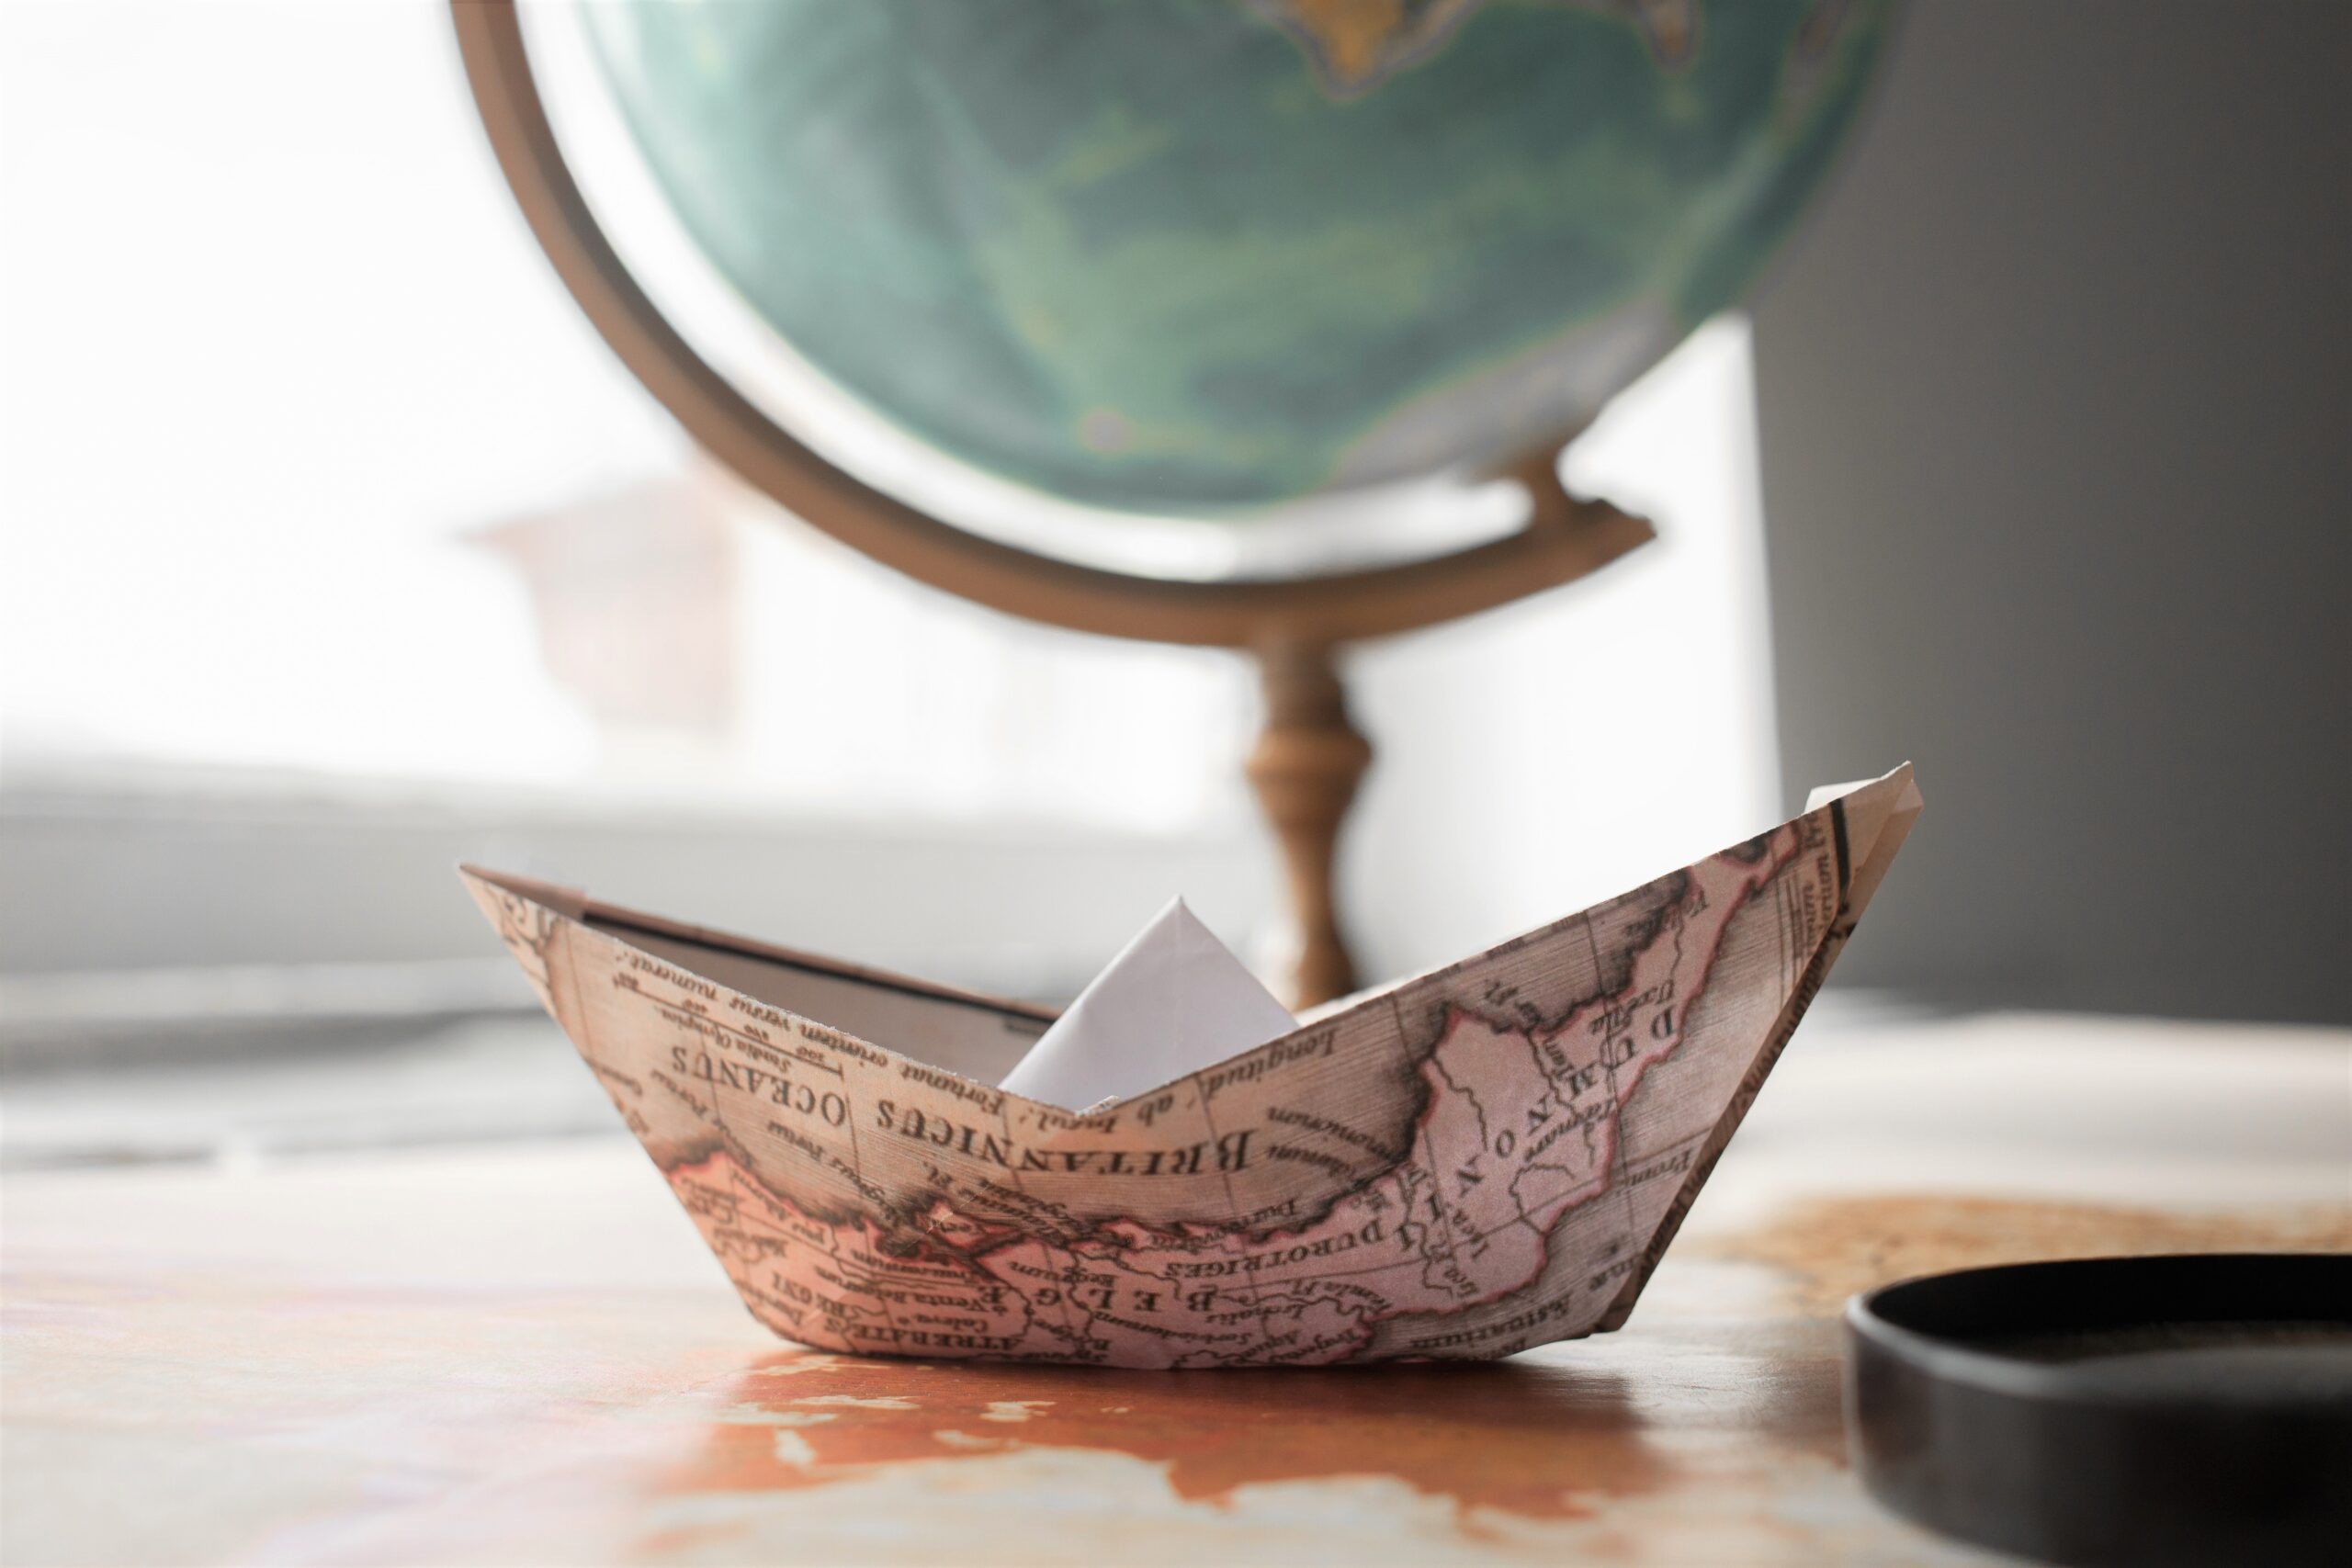 A paper boat made from a map is resting on a wooden table with a globe in the background.